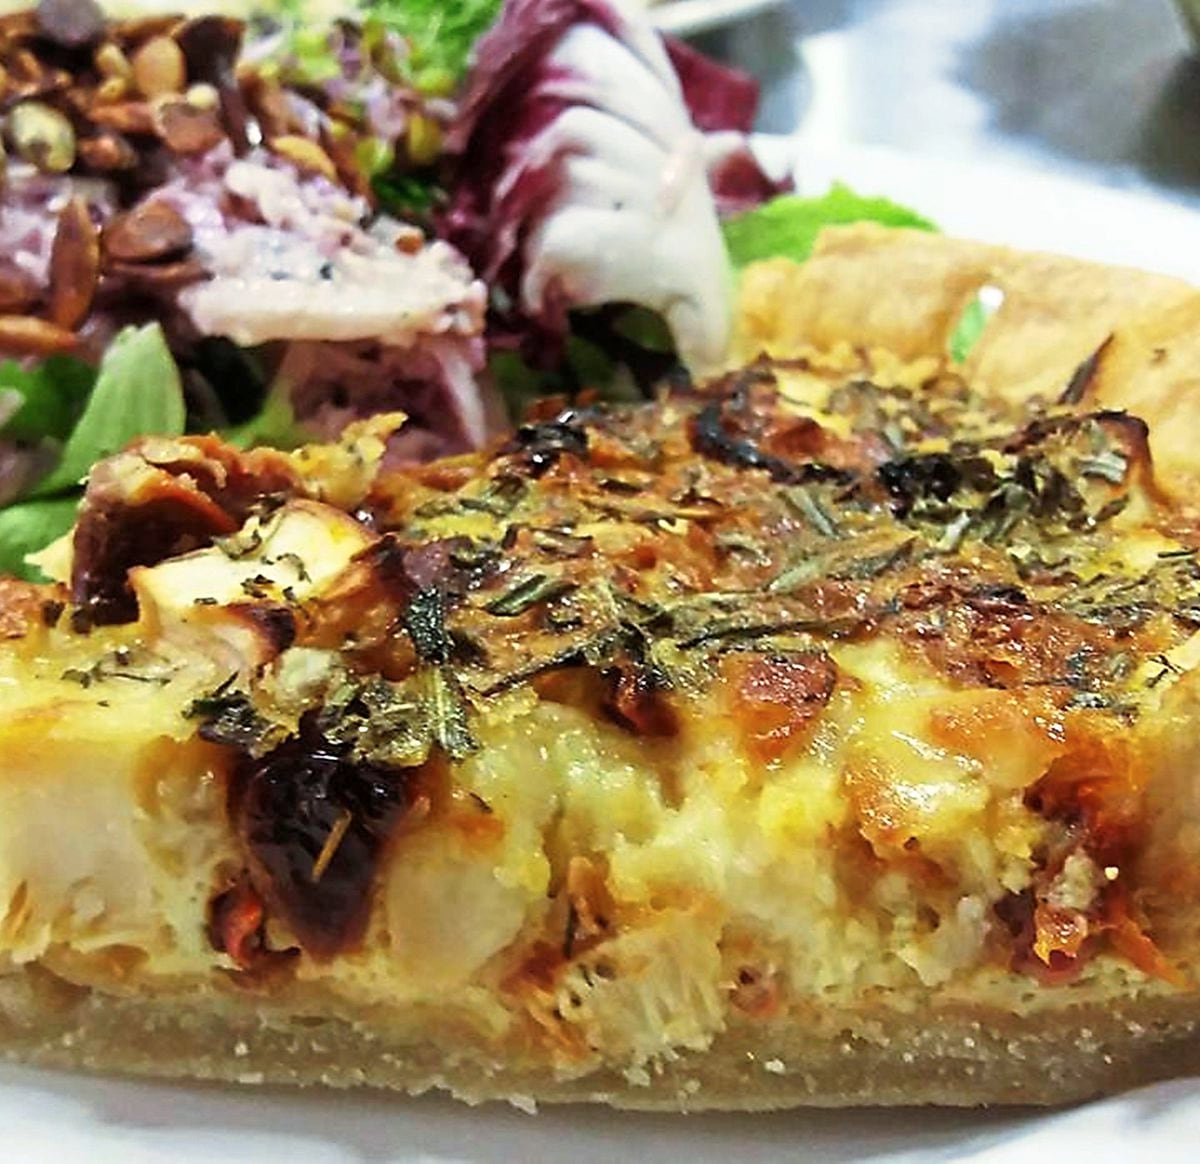 Say cheese – the goat’s cheese quiche